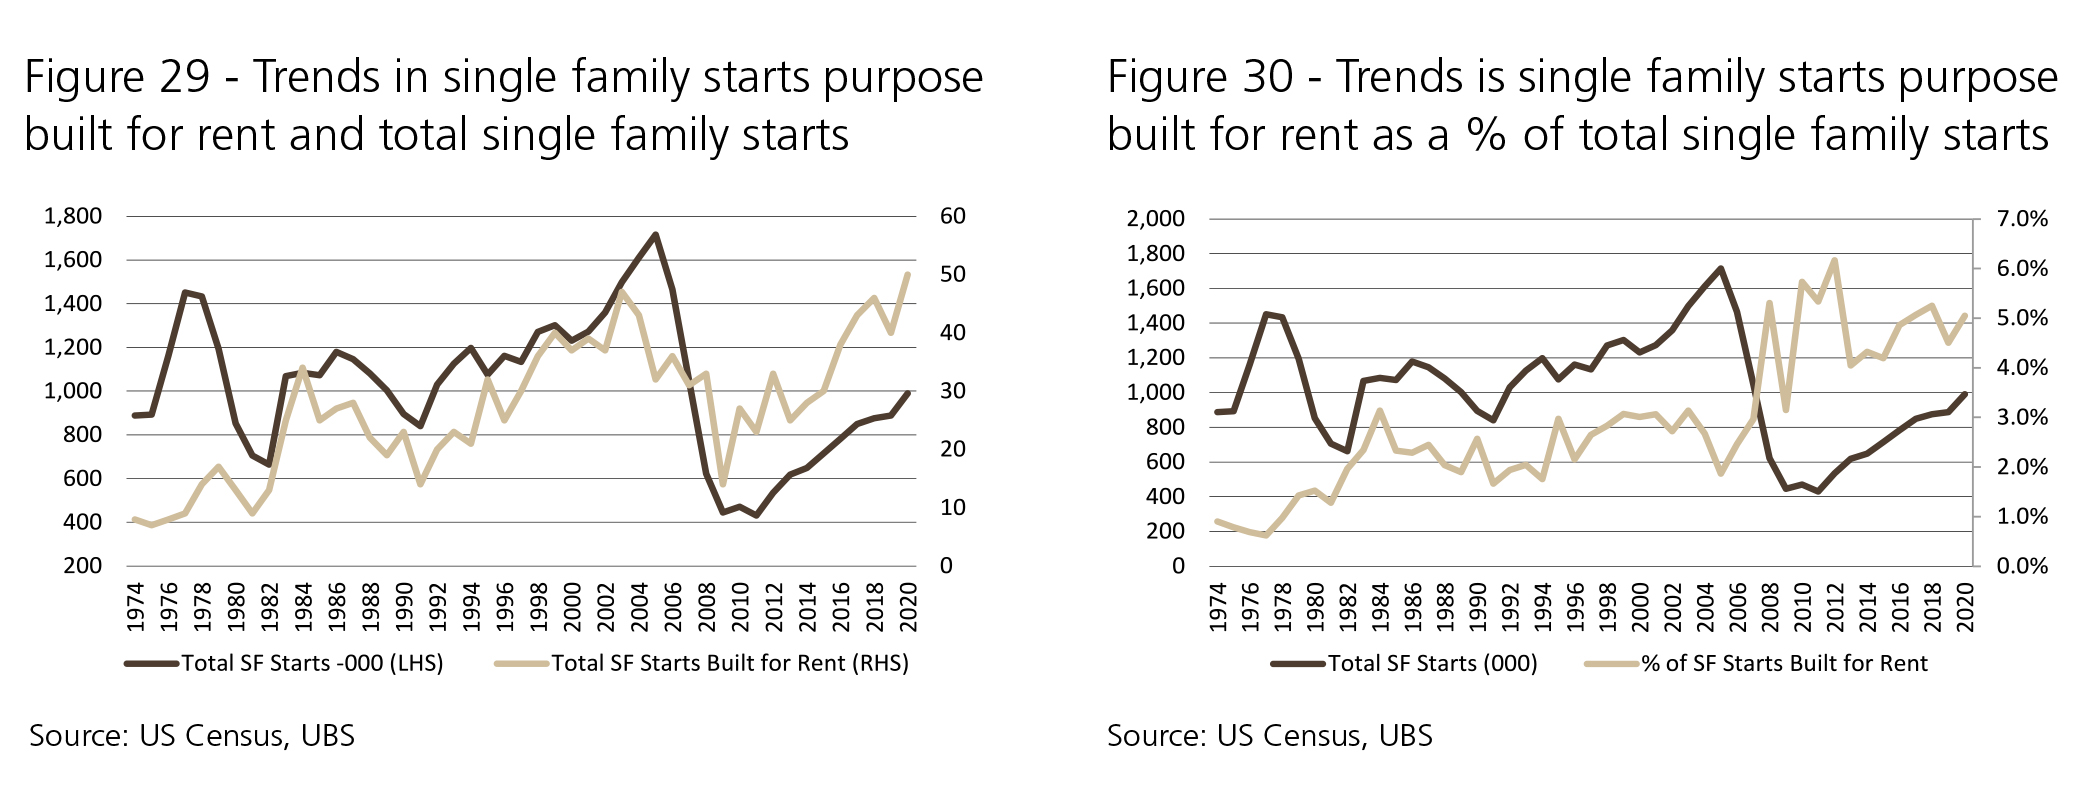 trends-in-single-family-starts-purpose-built-for-rent